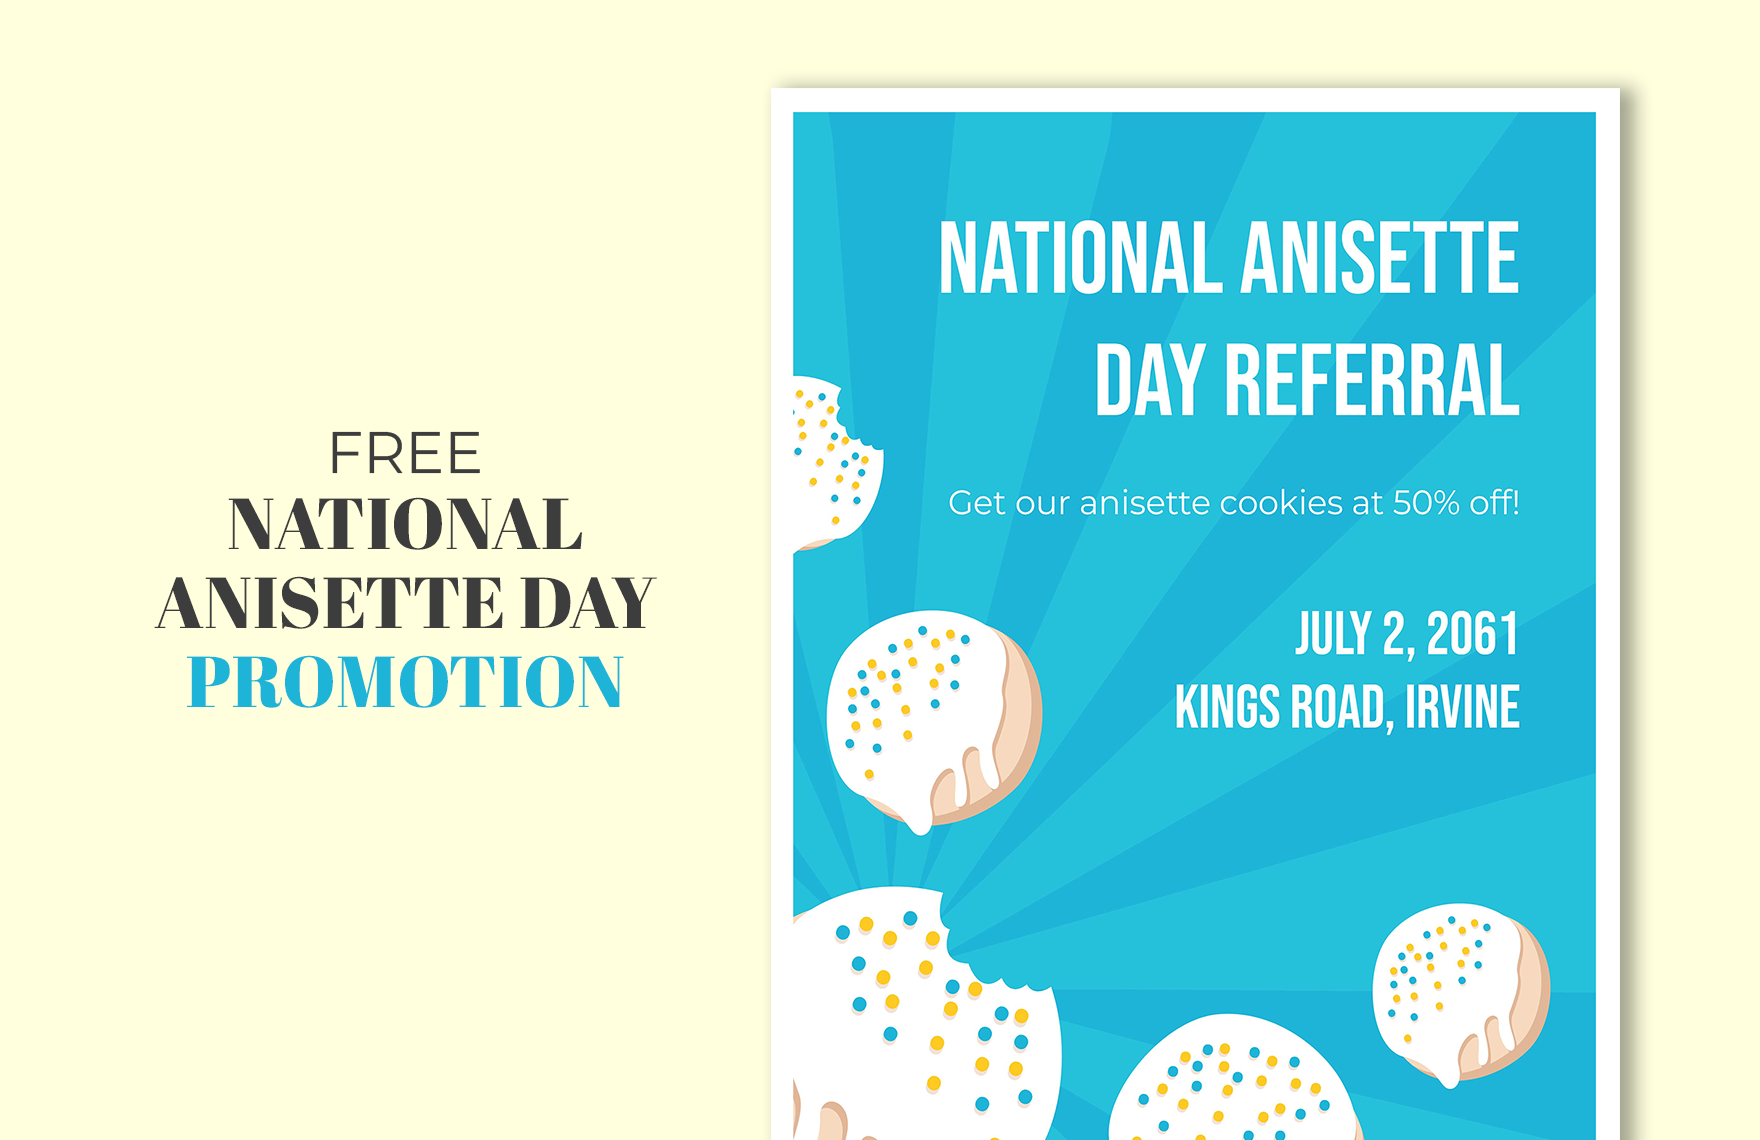 National Anisette Day Promotion